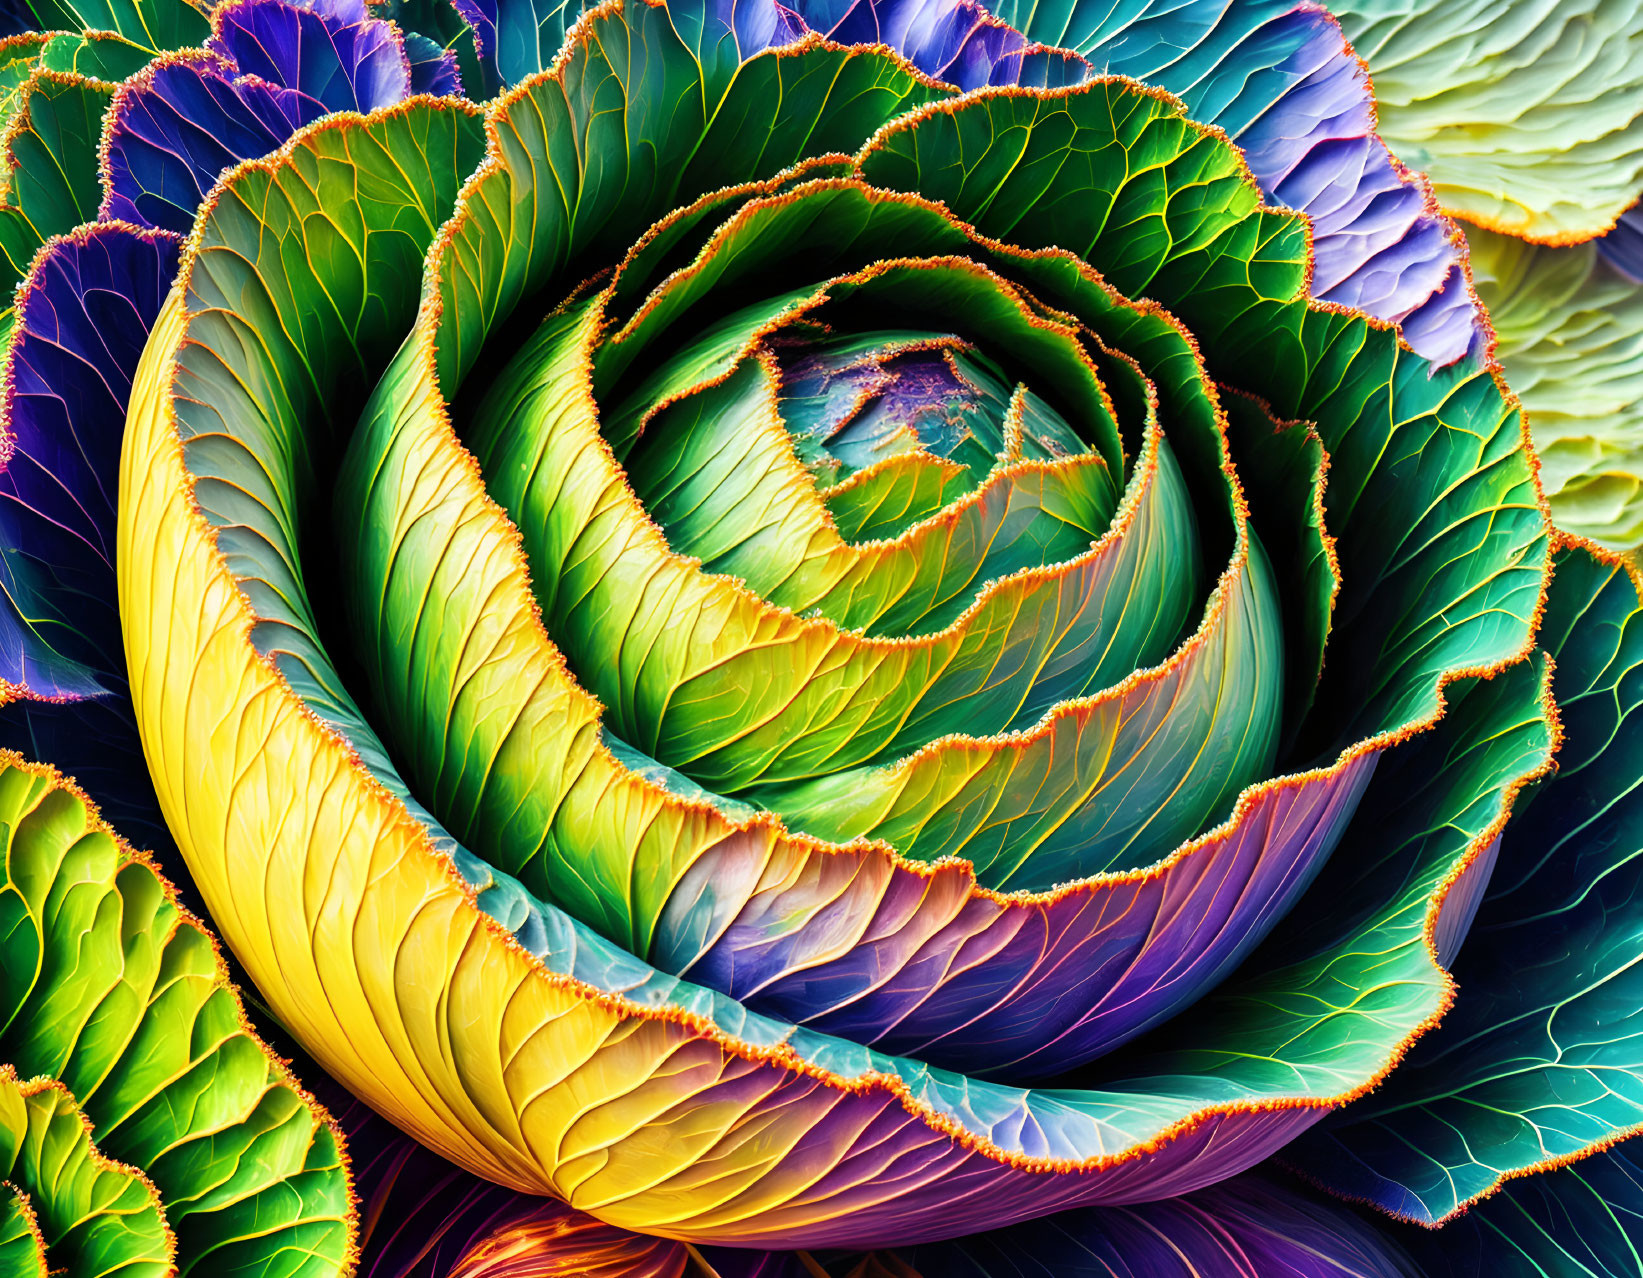 Colorful Spiral Fractal Art with Cabbage-Like Design